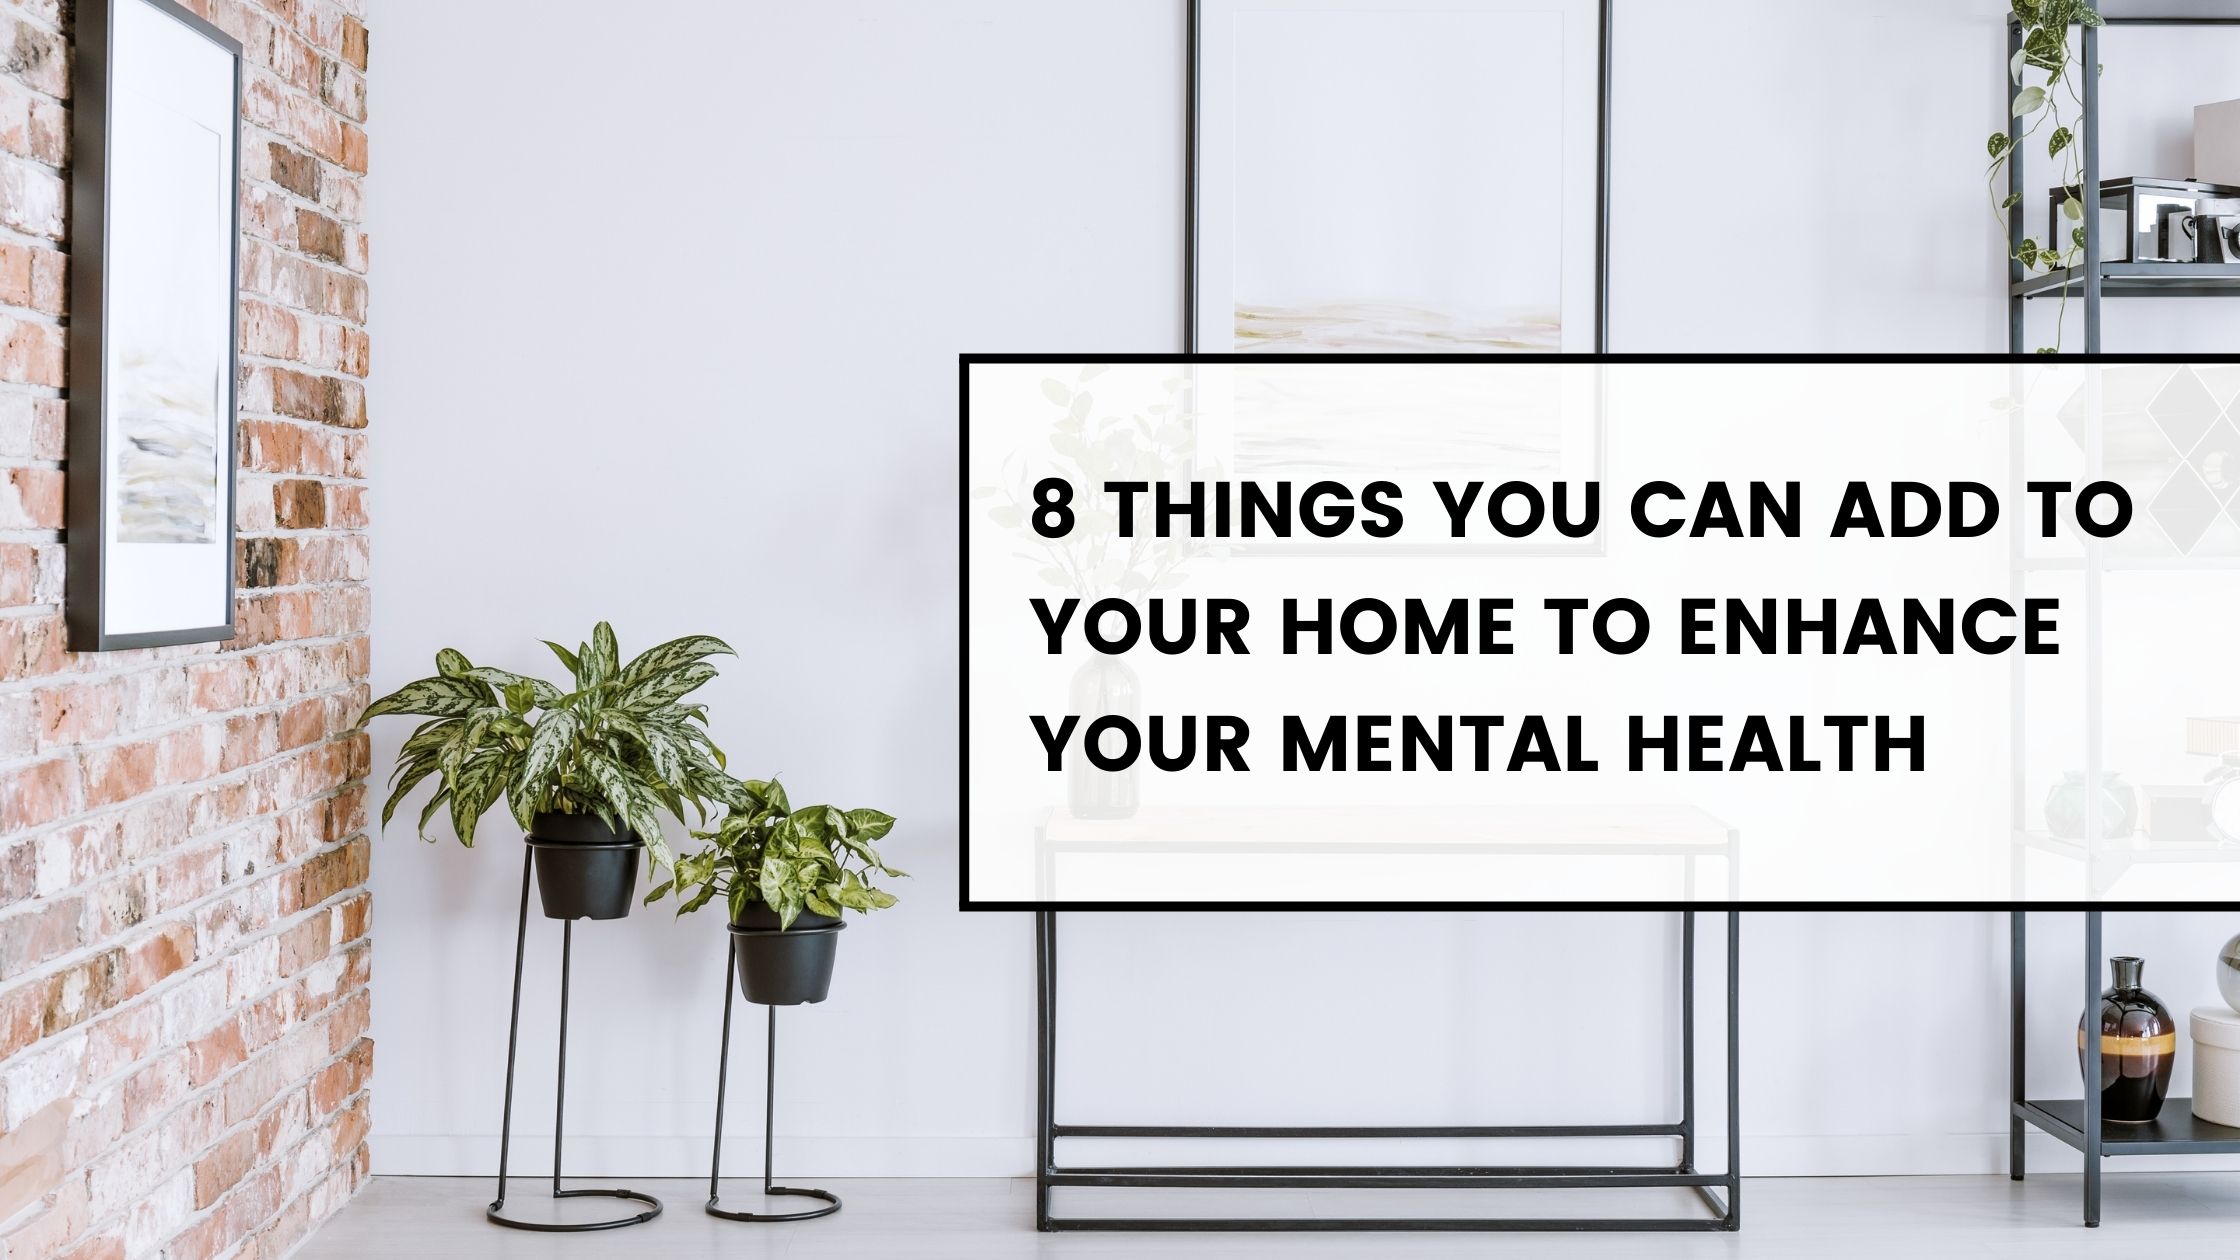 8 Things you can add to your home to enhance your mental health